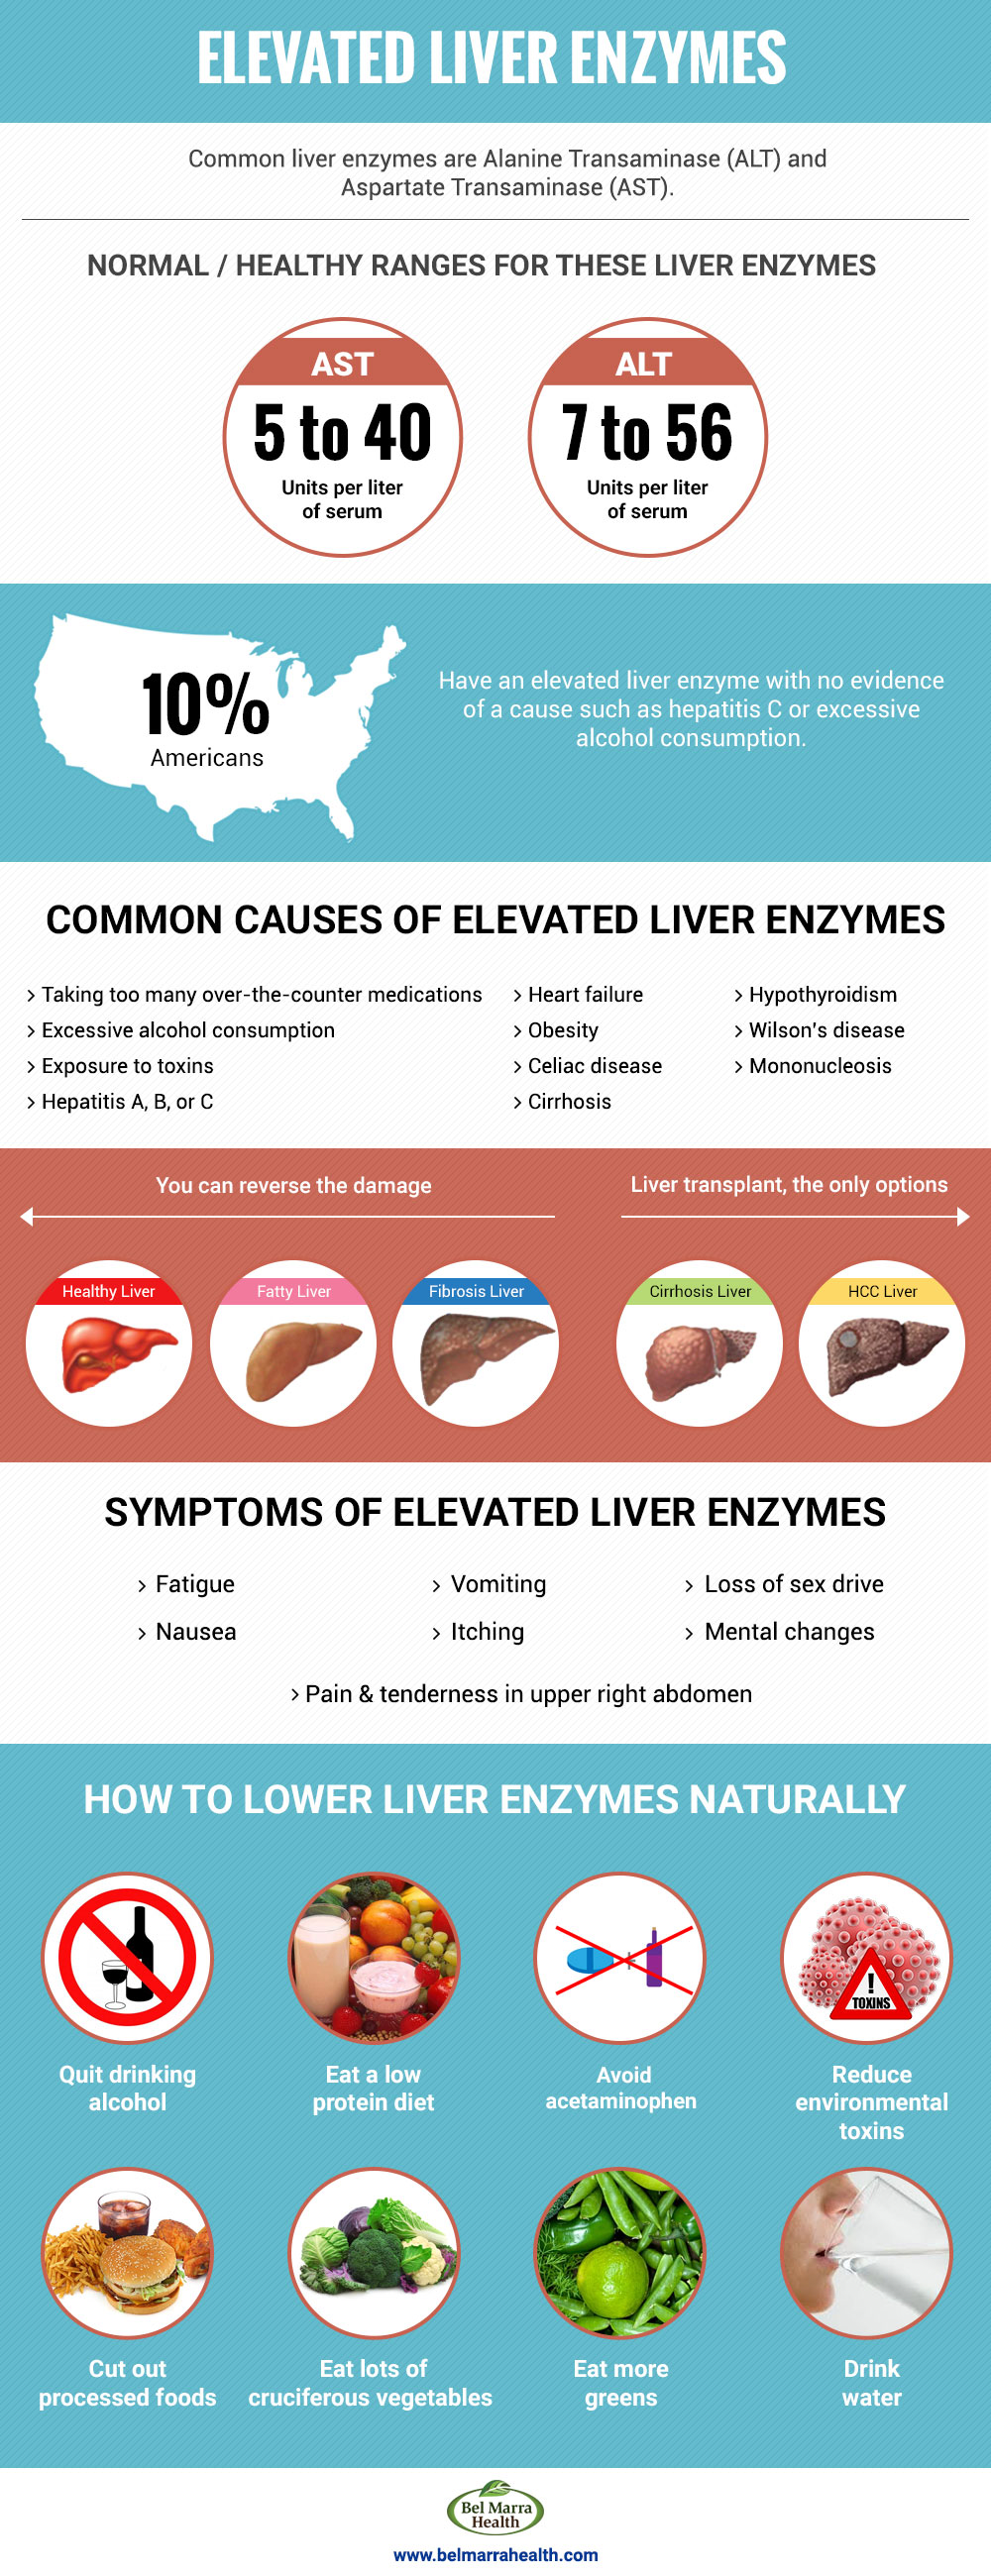 What are high liver enzymes?